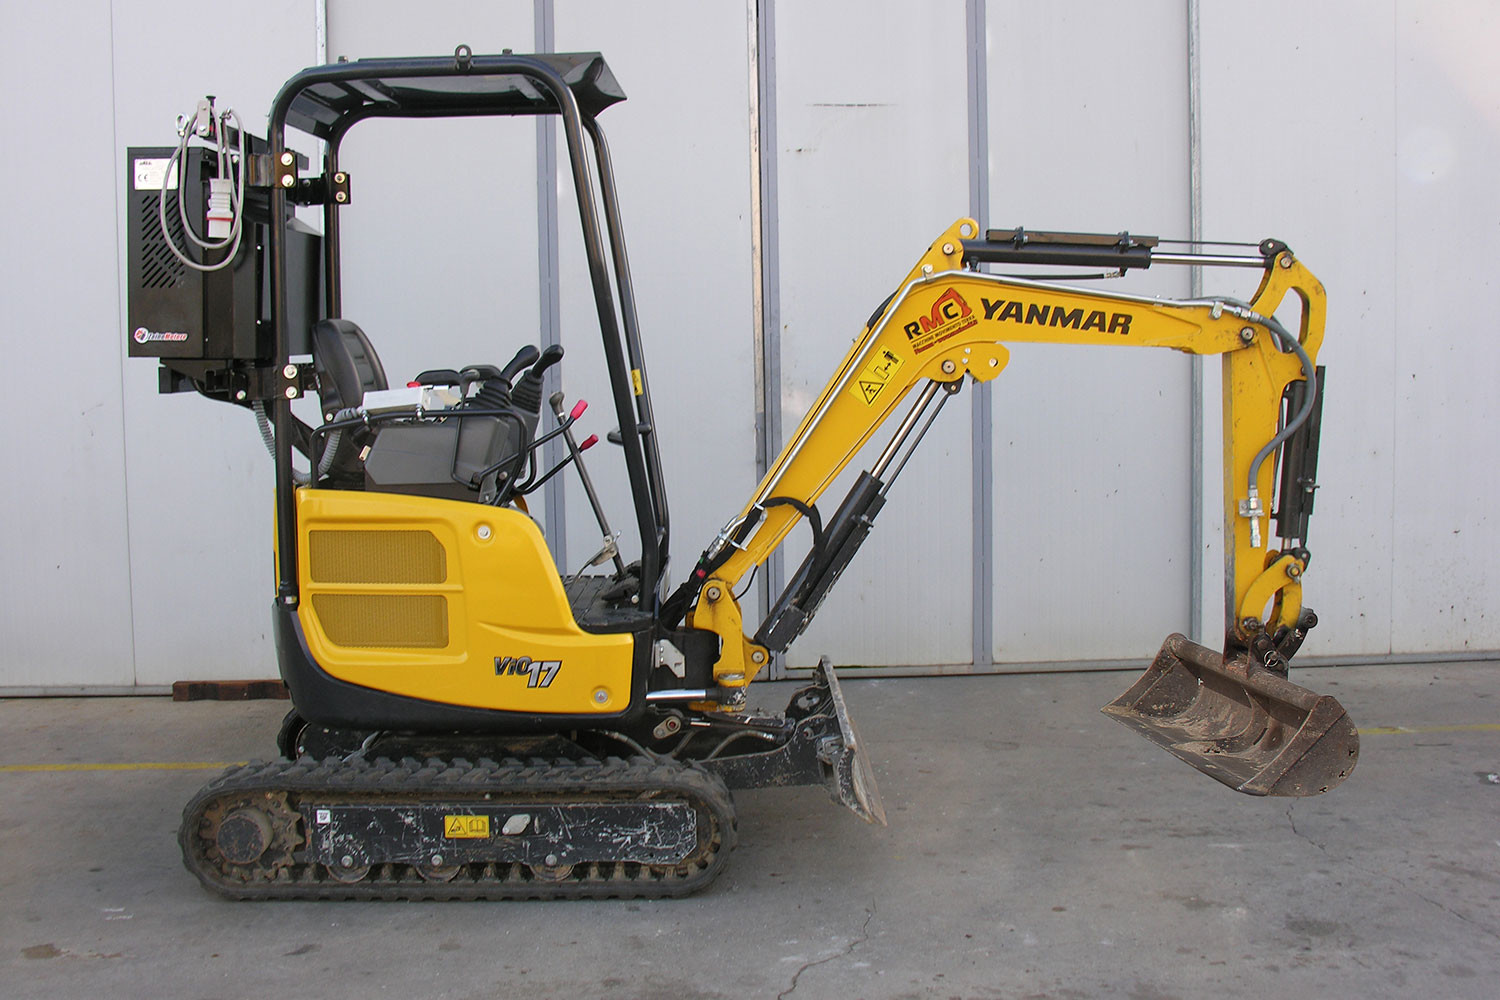 Right side view (on Yanmar)